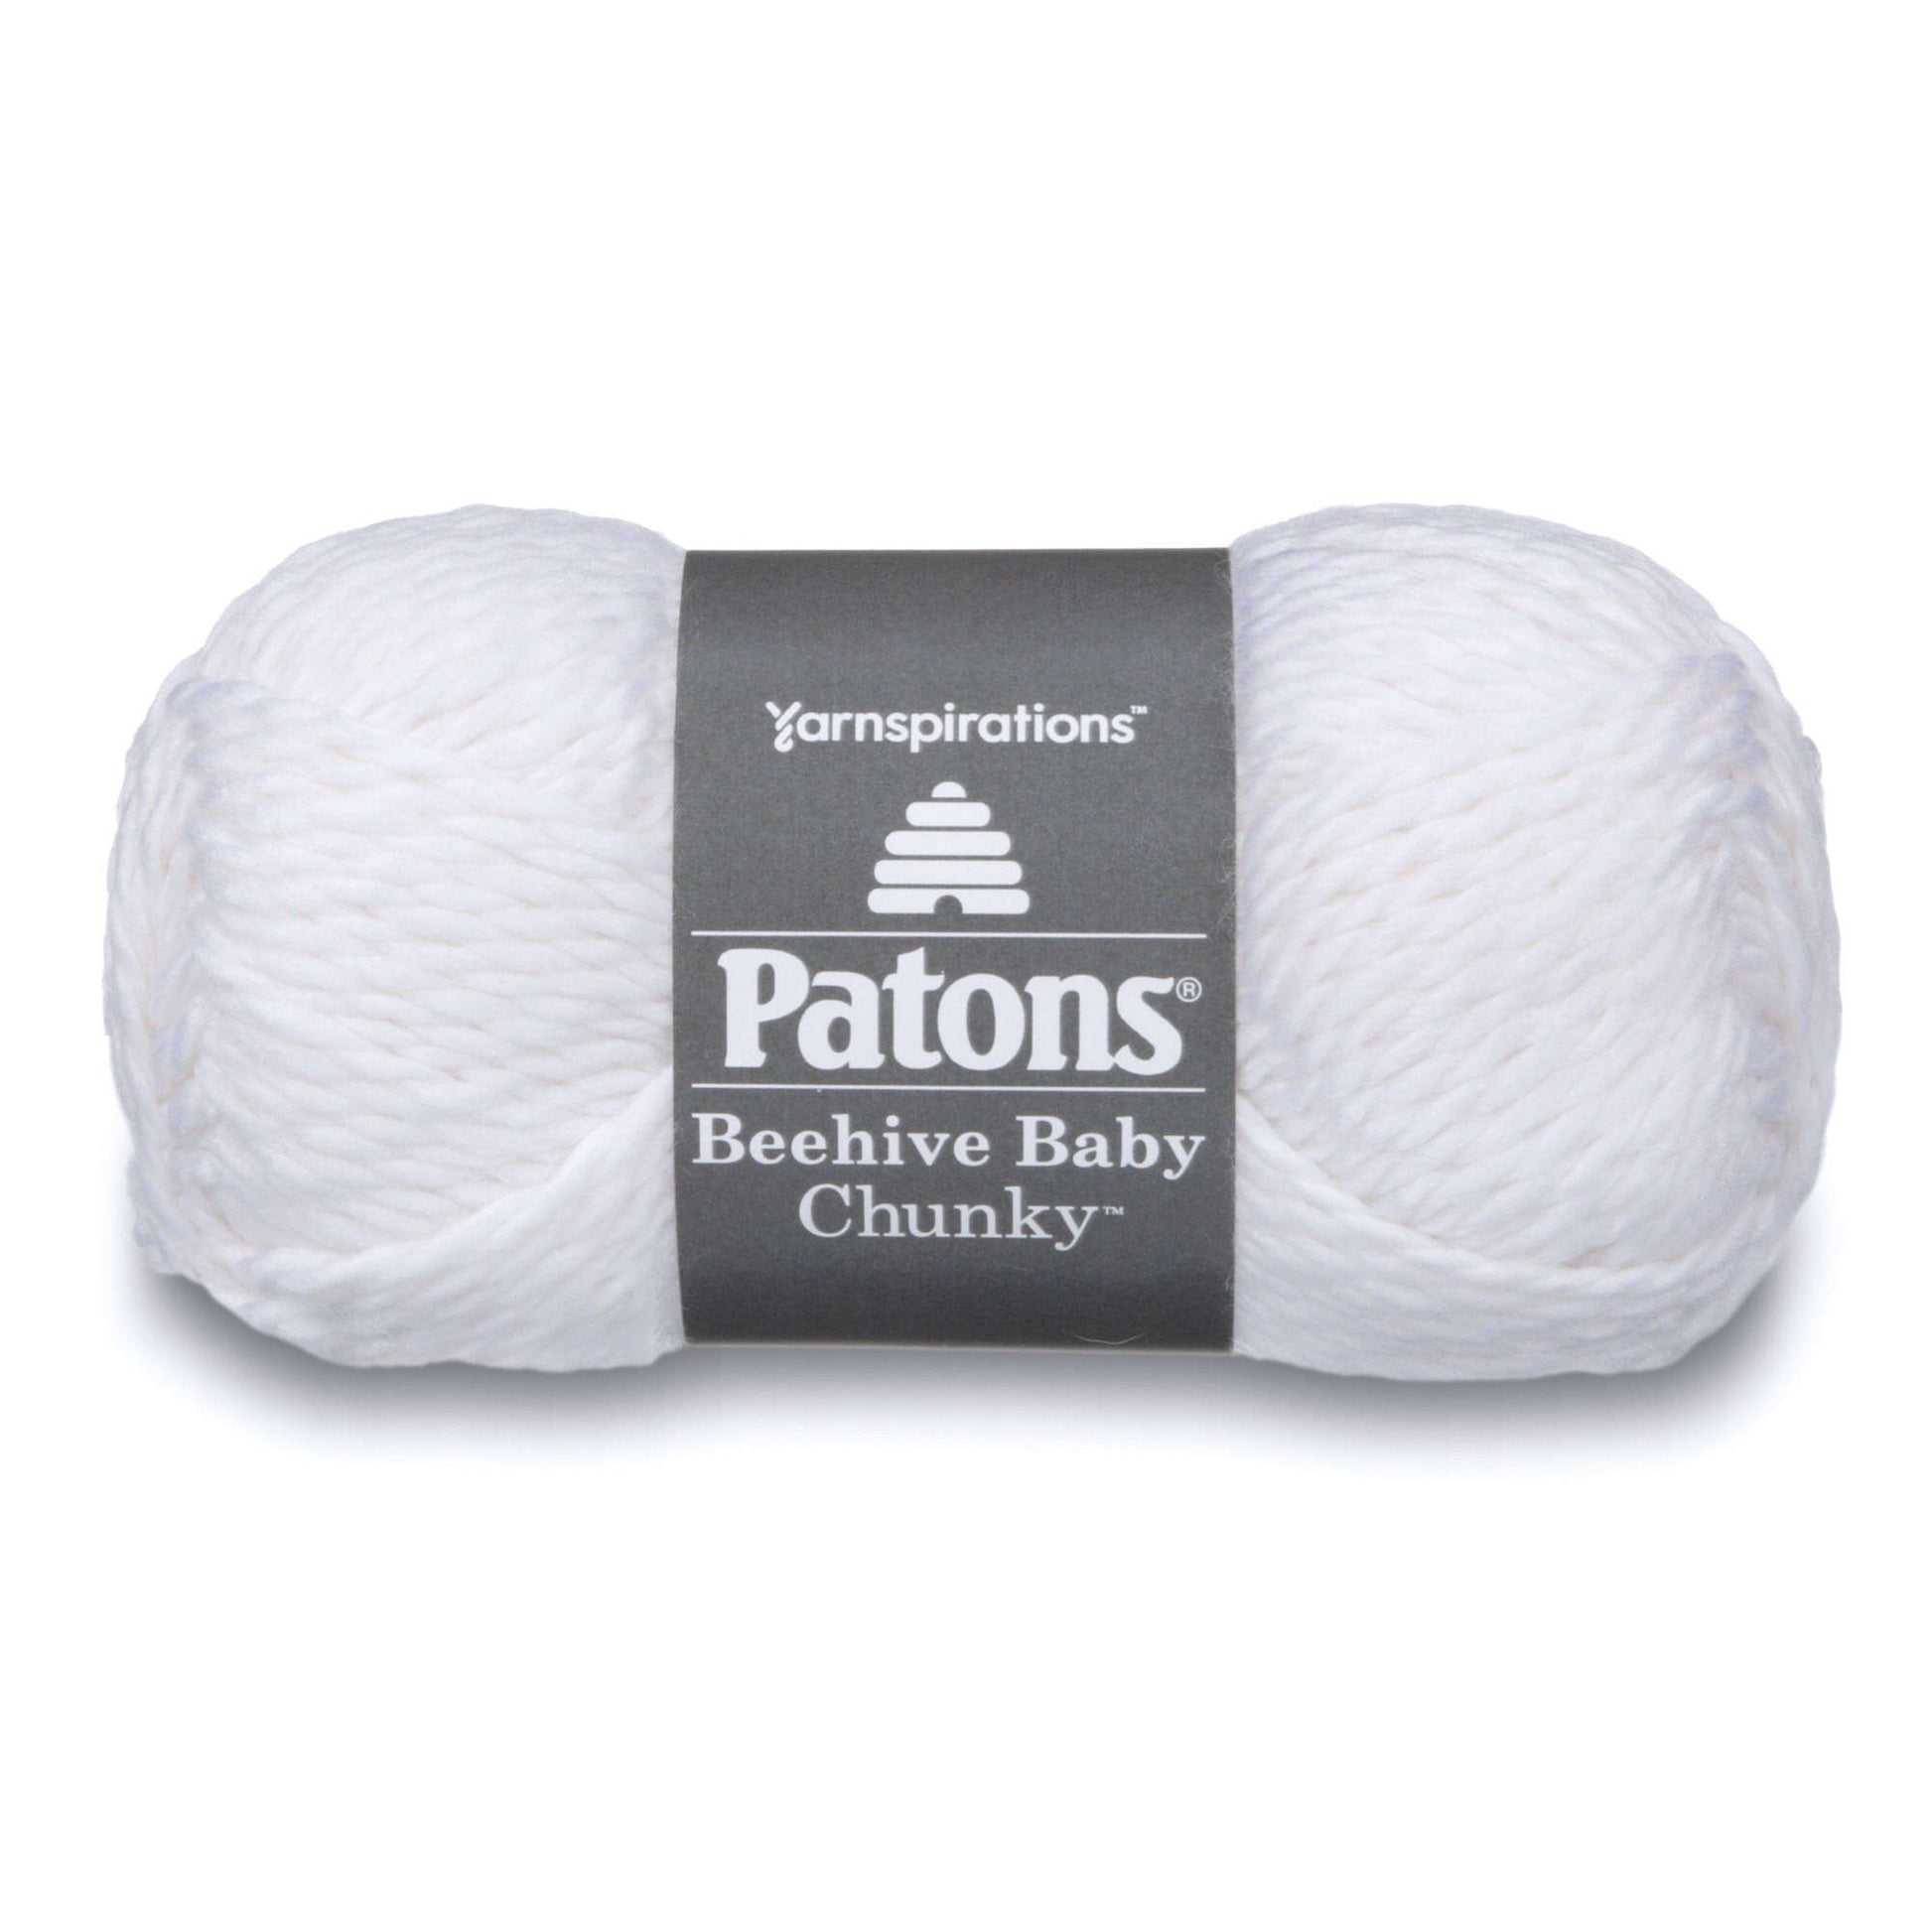 Patons Beehive Baby Chunky Yarn - Discontinued Shades Wider White